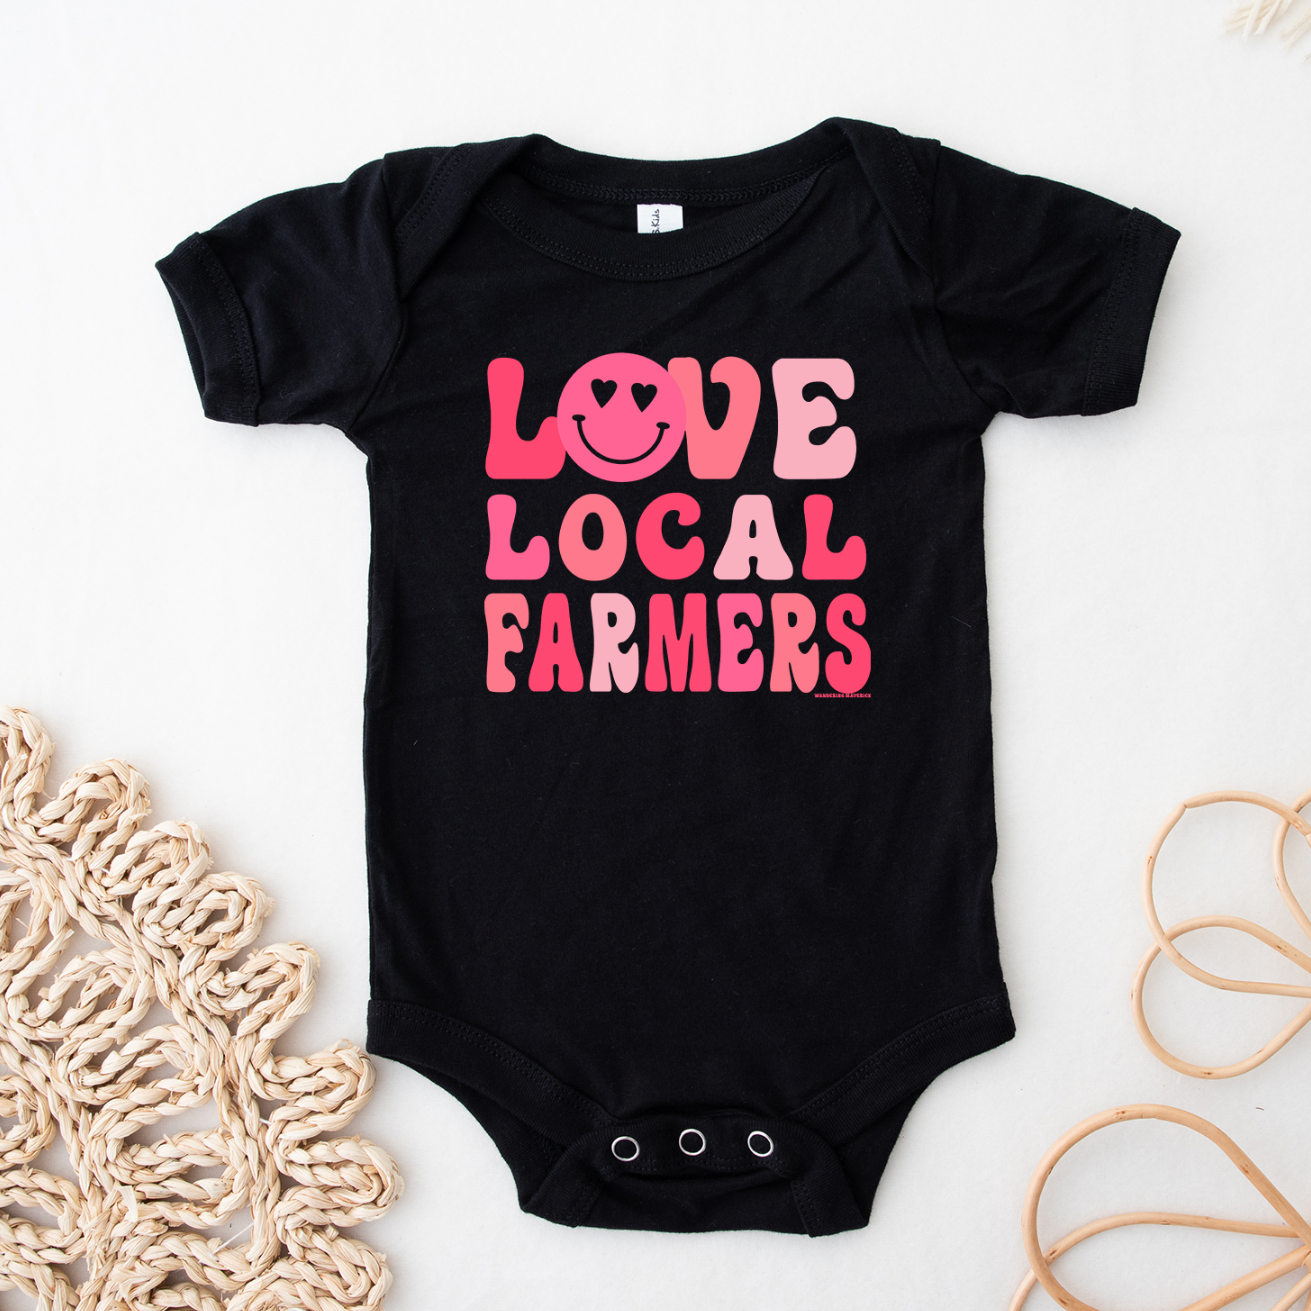 Love Local Farmers Smiley One Piece/T-Shirt (Newborn - Youth XL) - Multiple Colors!